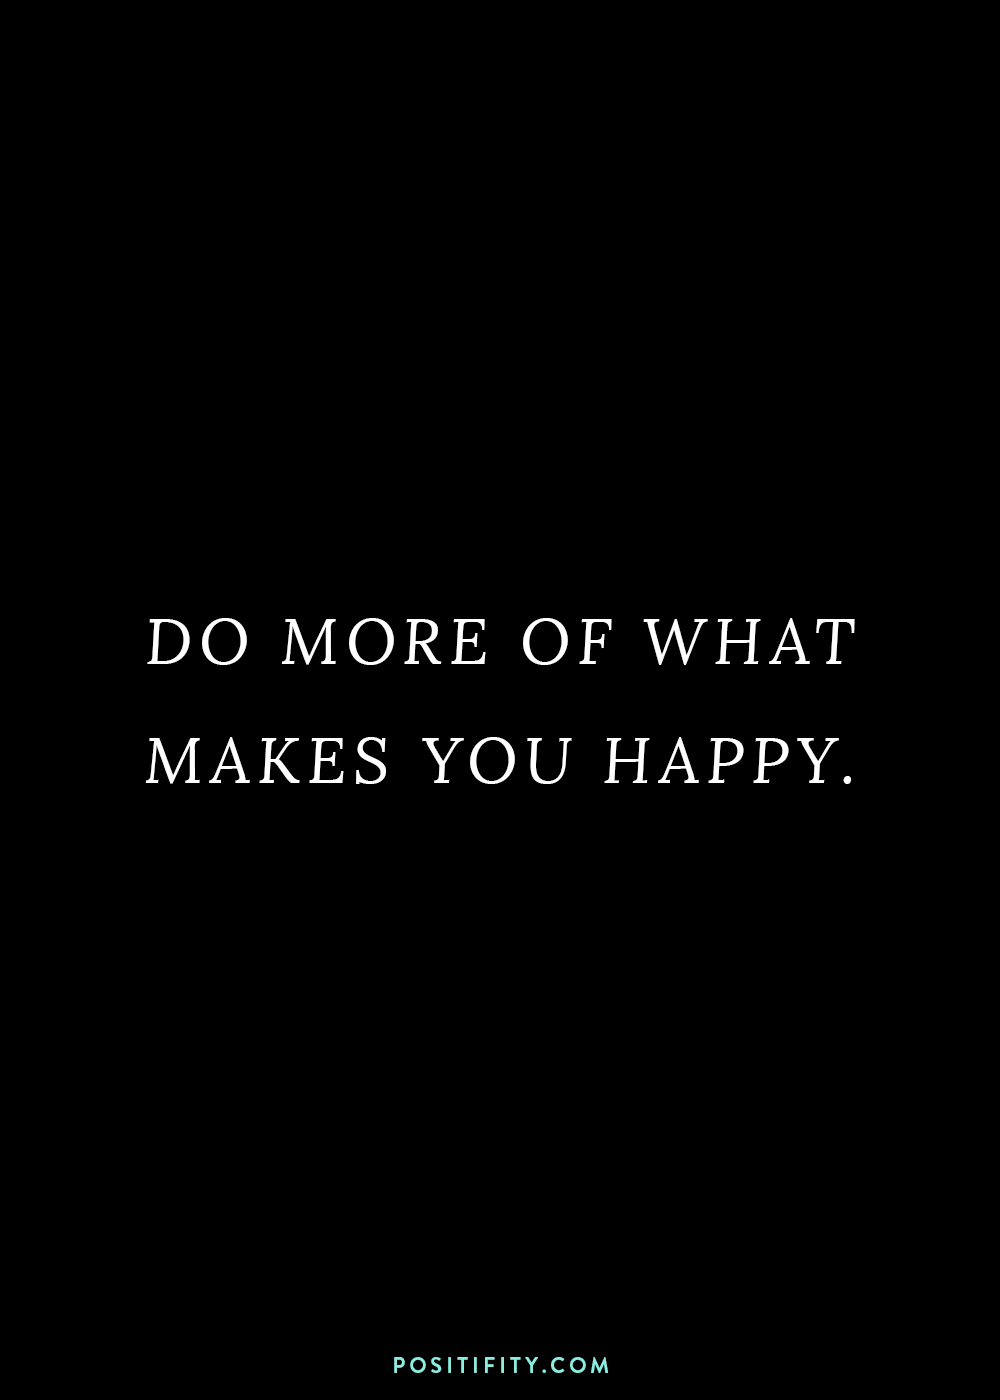 “Do more of what makes you happy.”